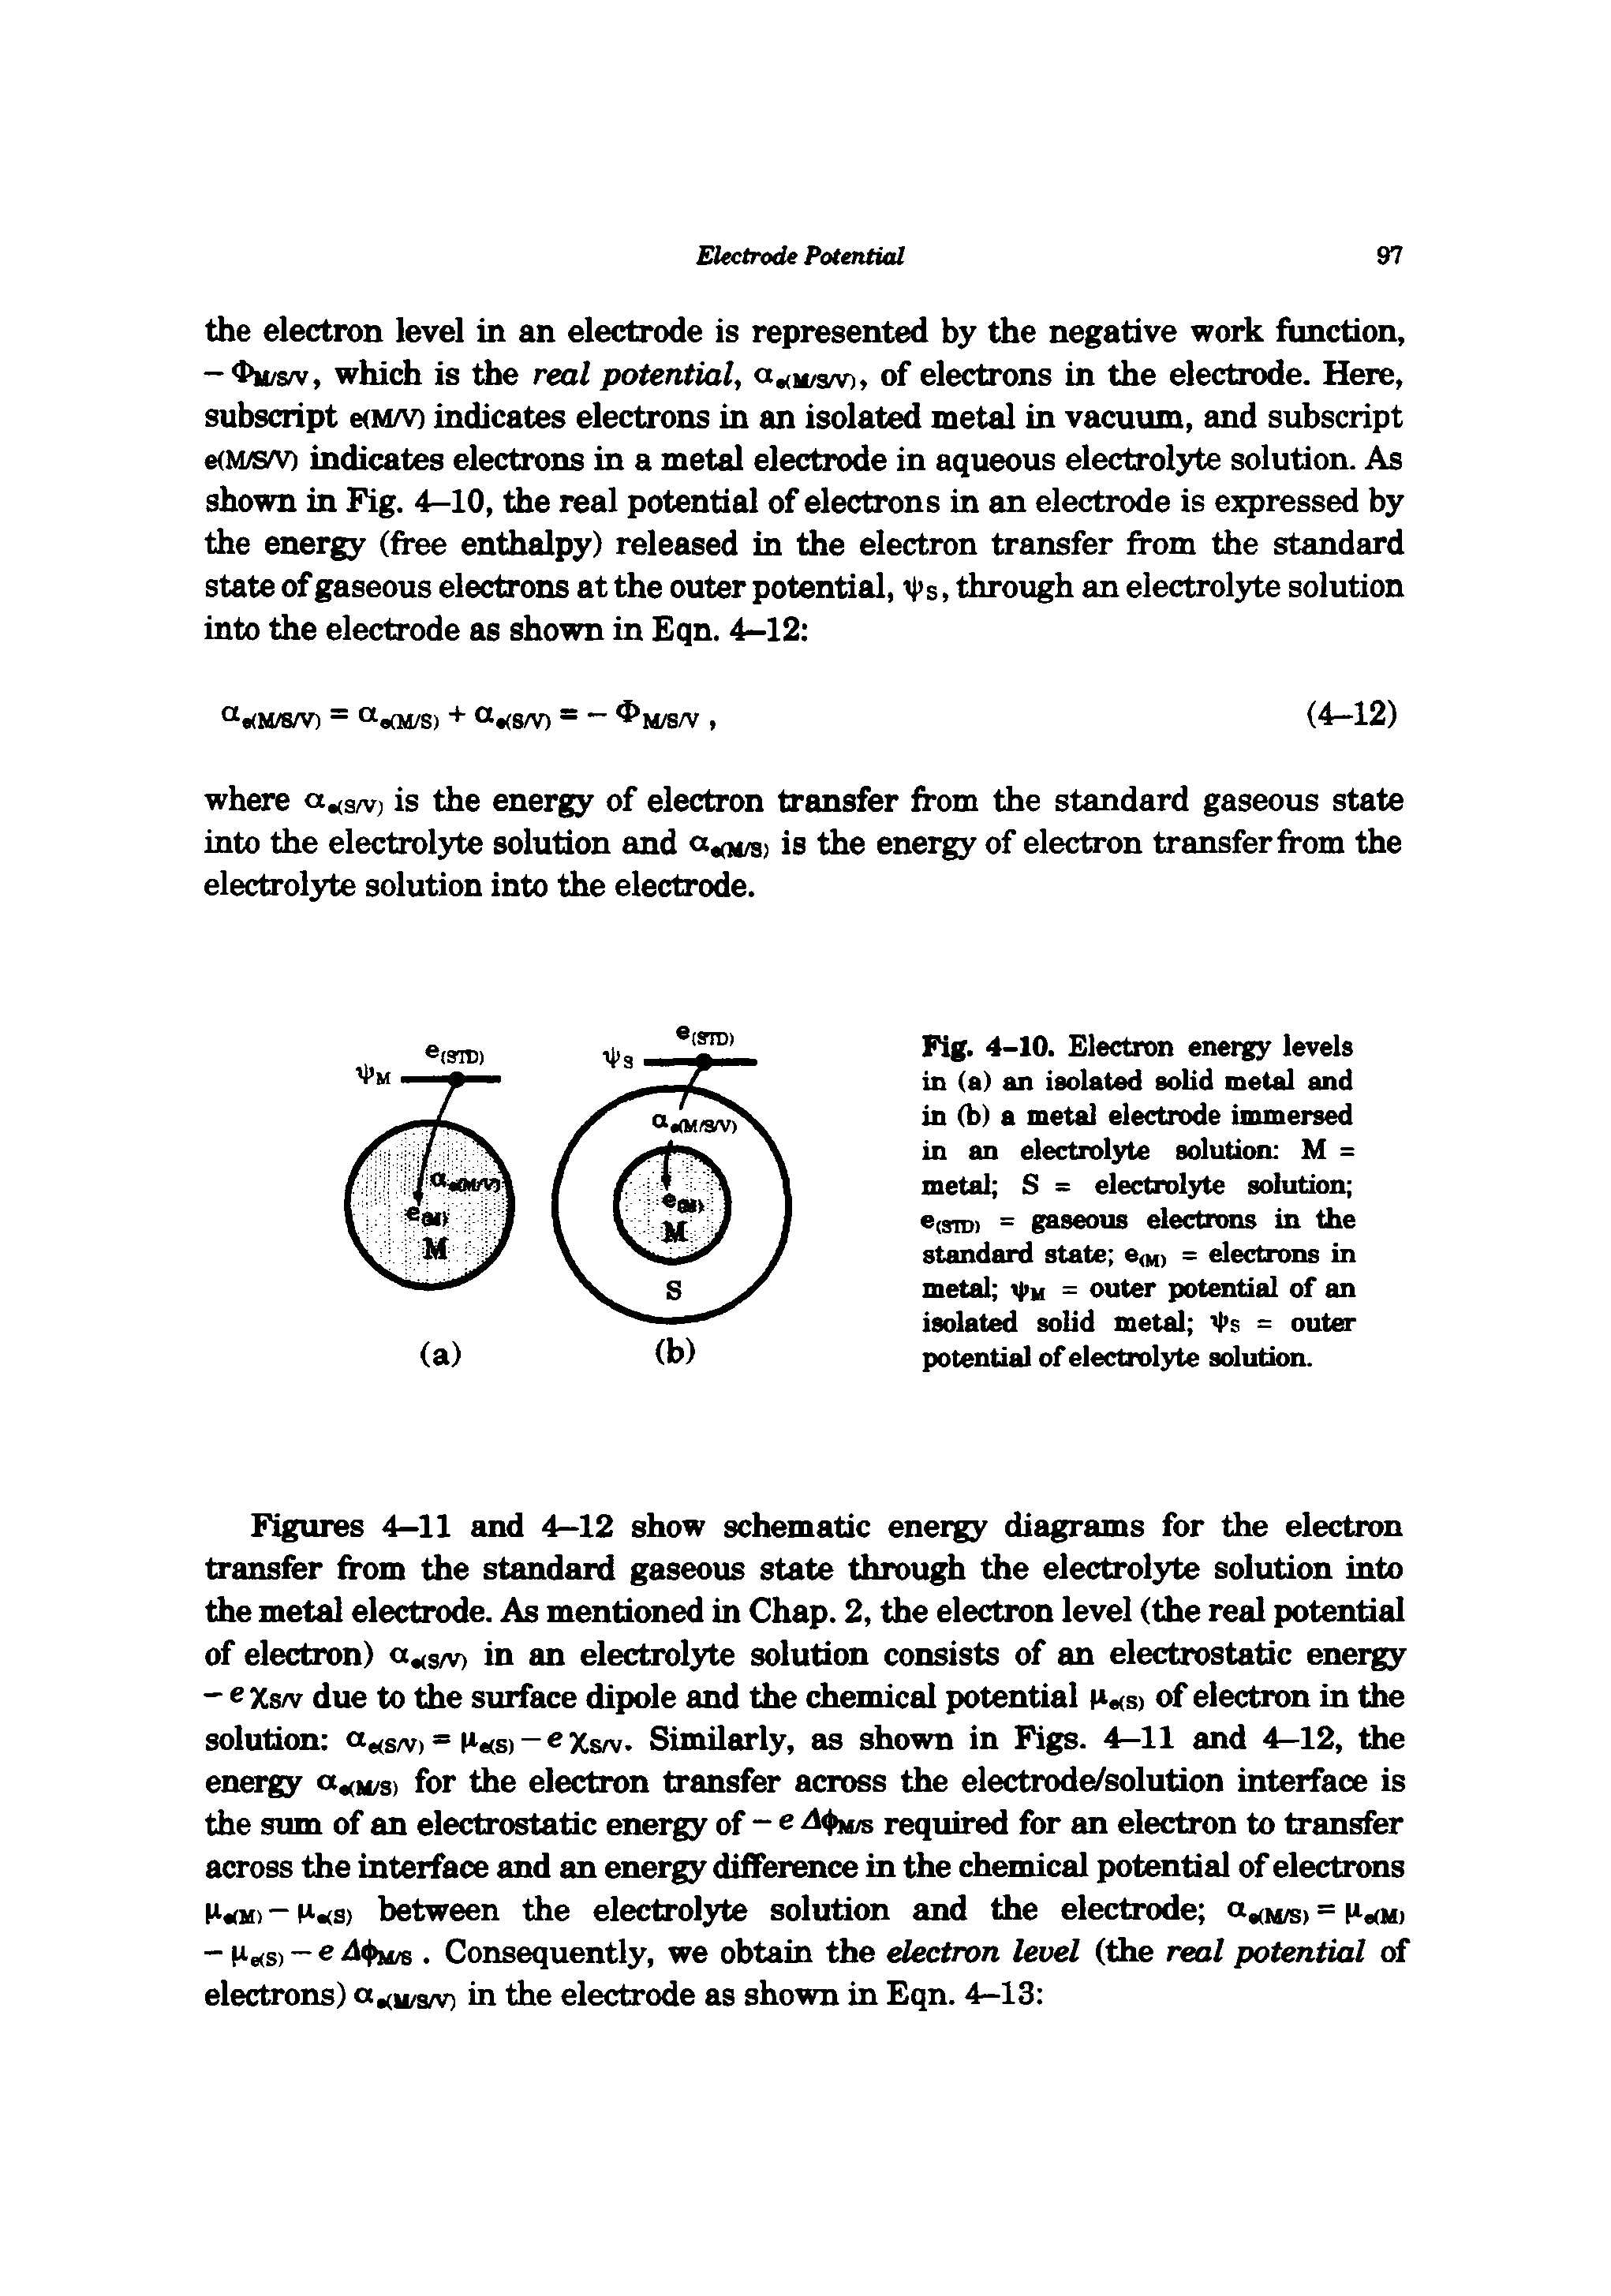 Figures 4-11 and 4-12 show schematic energy diagrams for the electron transfer from the standard gaseous state through the electrolyte solution into the metal electrode. As mentioned in Chap. 2, the electron level (the real potential of electron) a s/v> in an electrolyte solution consists of an electrostatic energy...